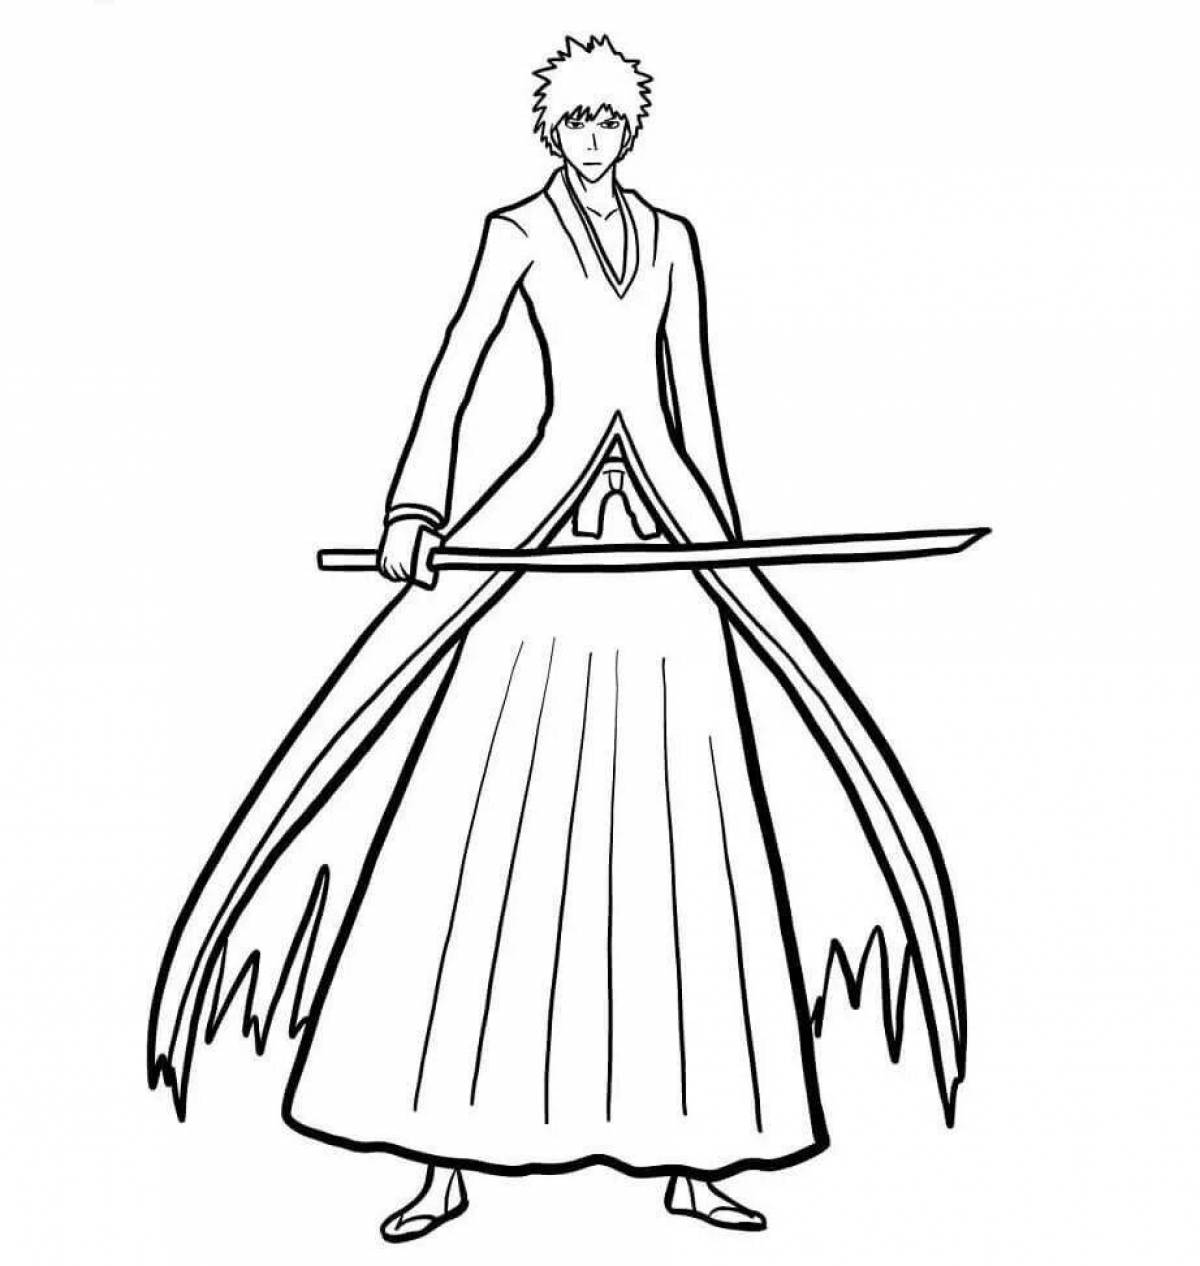 Bleach bleach anime coloring pages